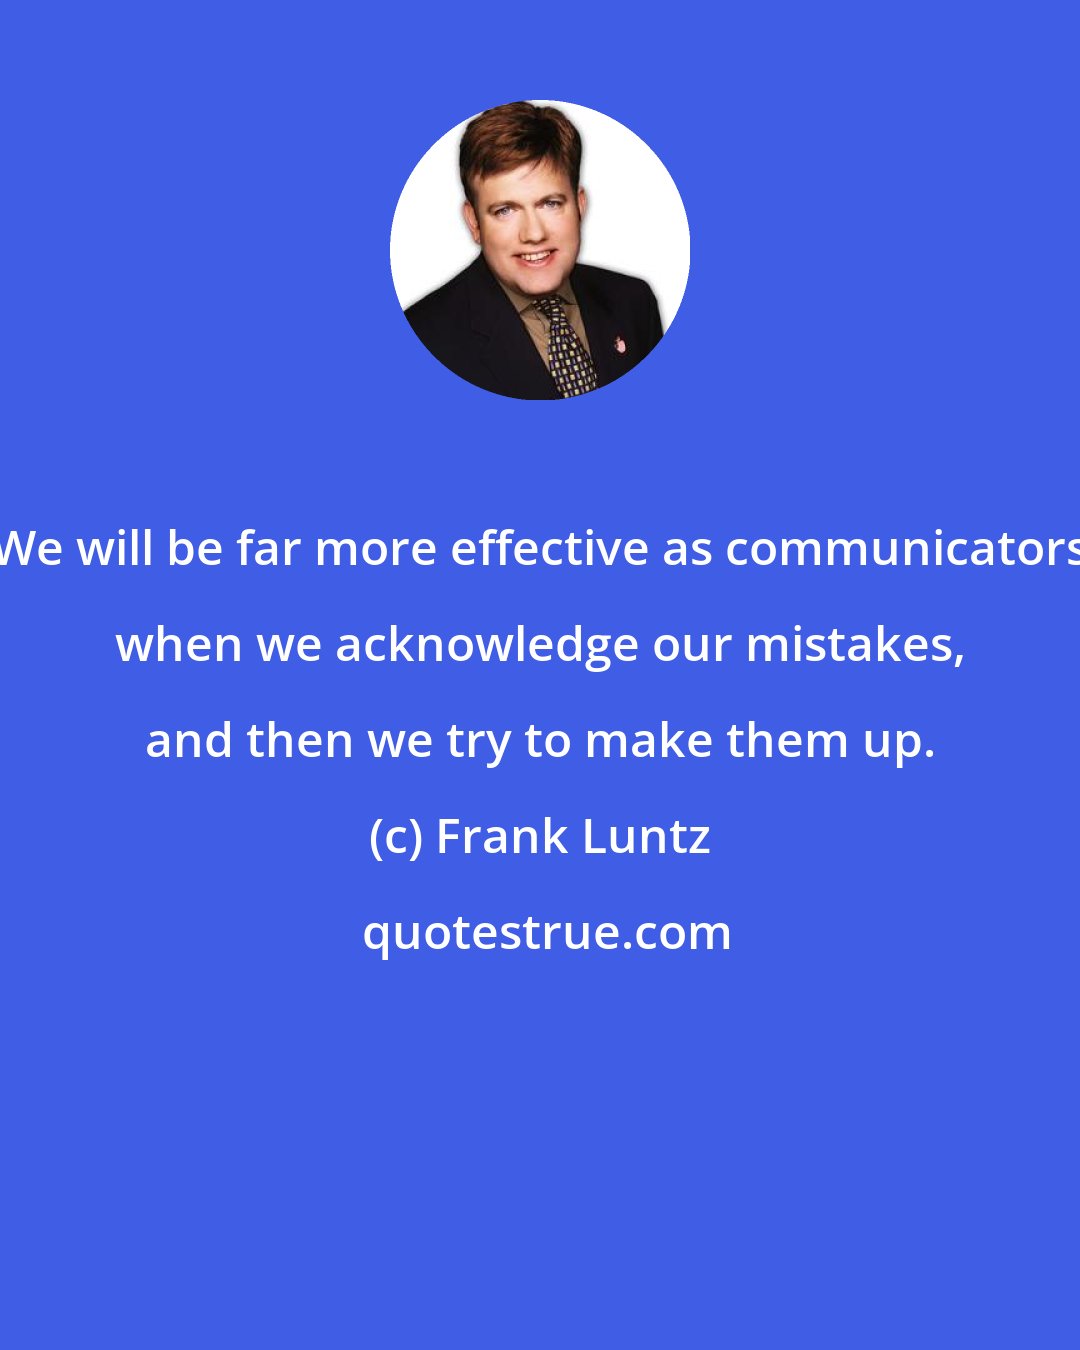 Frank Luntz: We will be far more effective as communicators when we acknowledge our mistakes, and then we try to make them up.